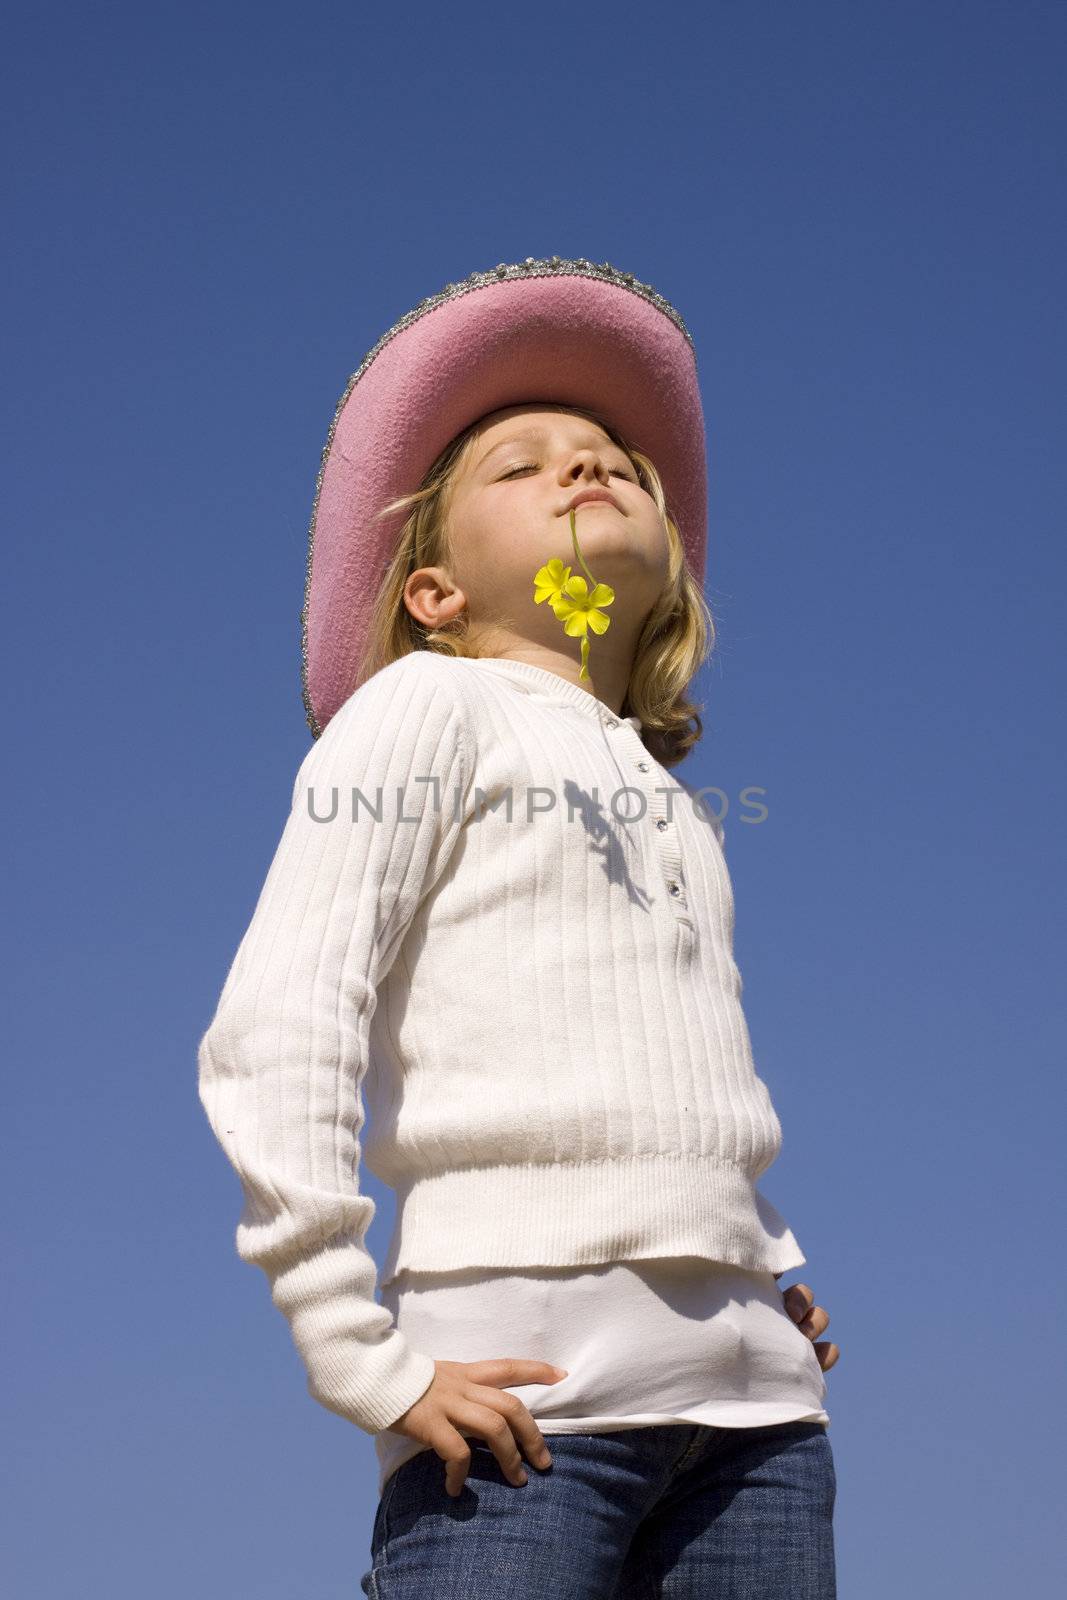 A young girl with hat and a flower in her mouth soaking up the sun. Closed eyes. Isolated on blue background. 